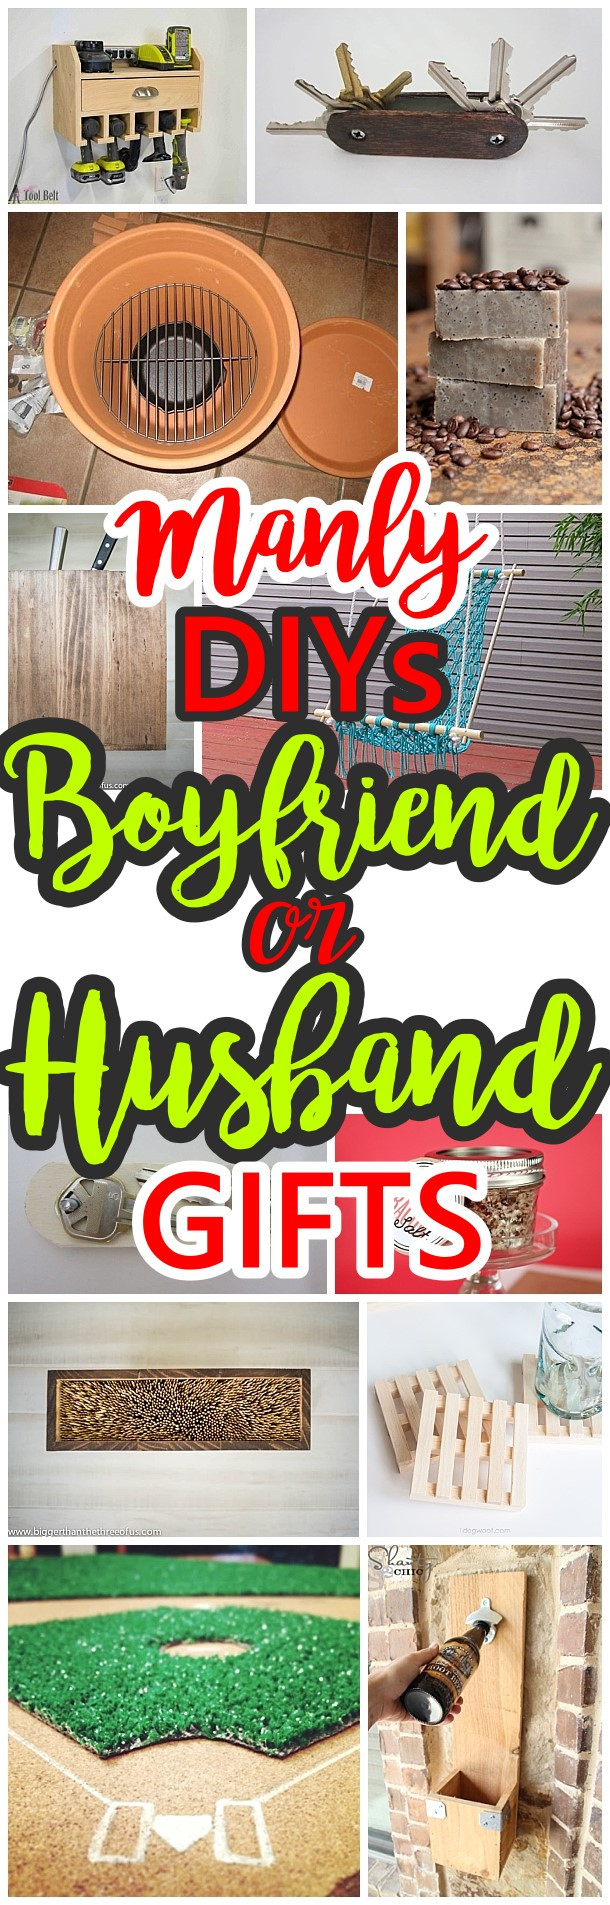 DIY Gifts For Husbands Birthday
 Manly Do It Yourself Boyfriend and Husband Gift Ideas